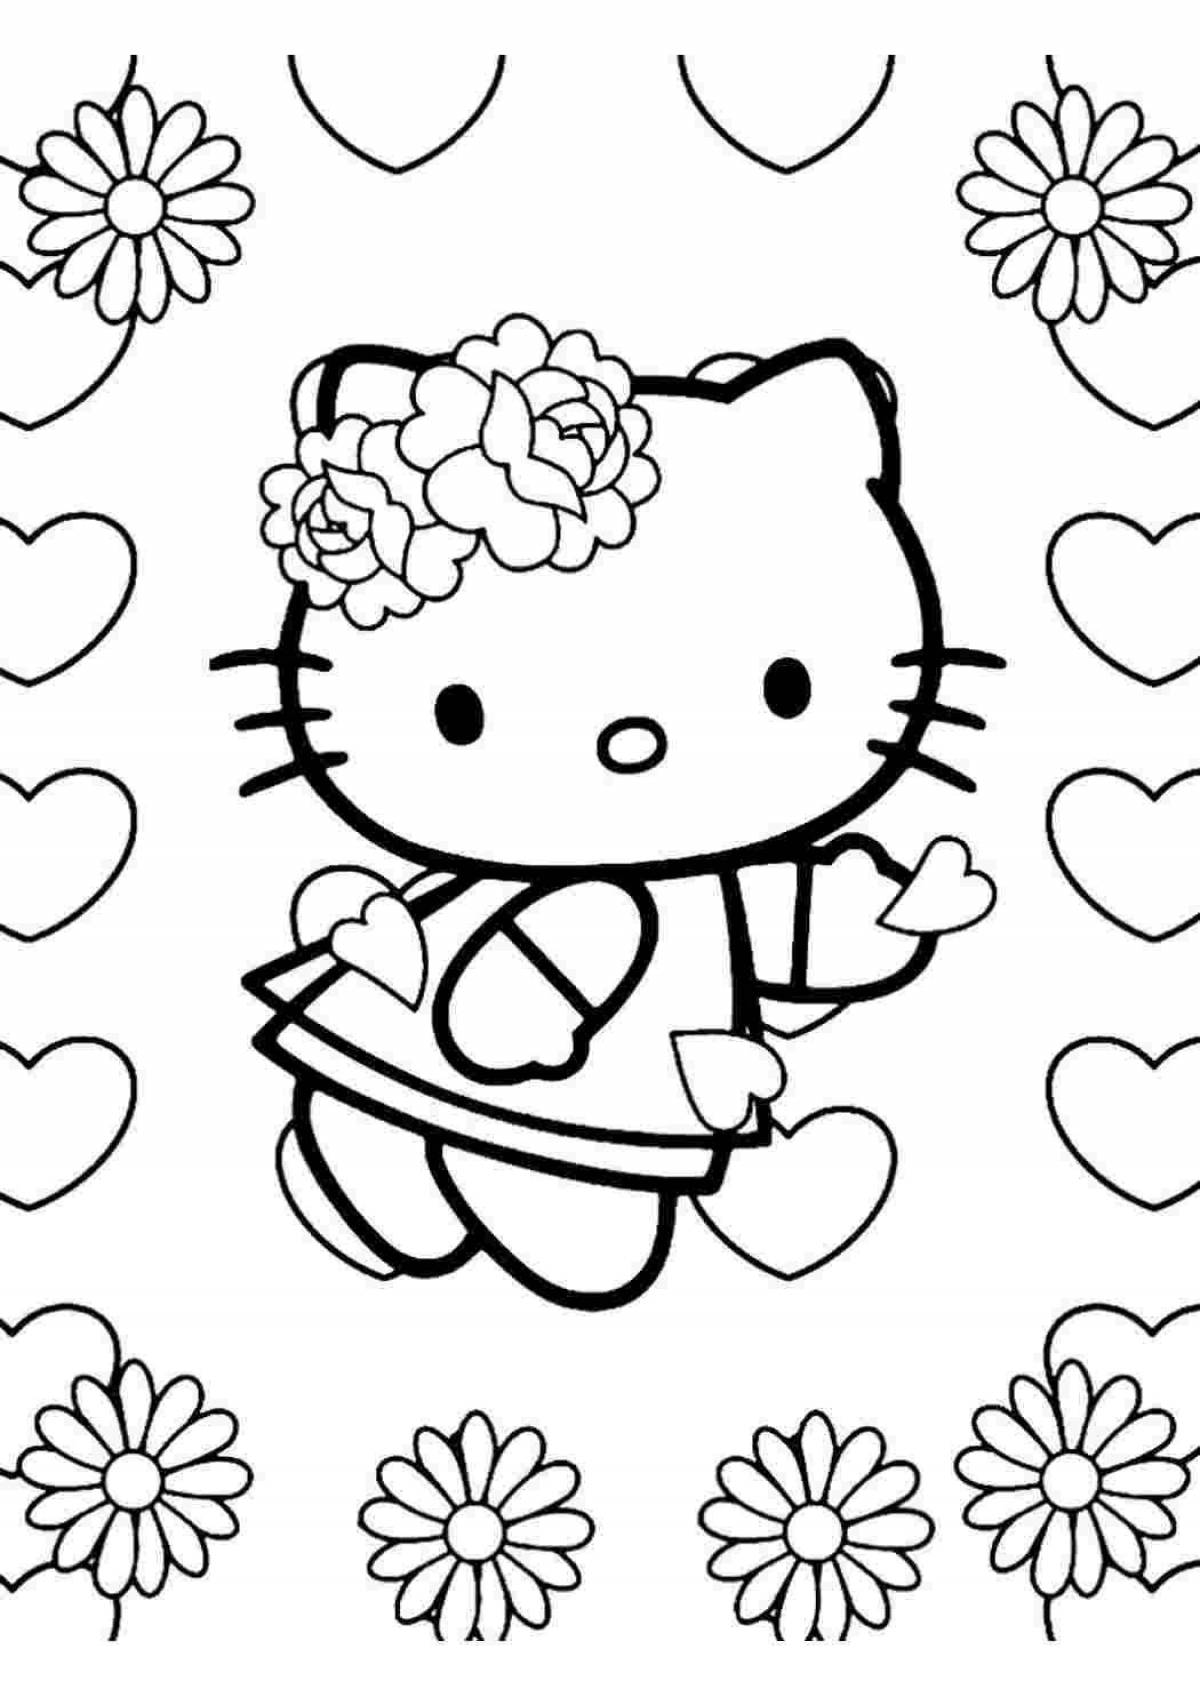 Witty kitty coloring book for kids